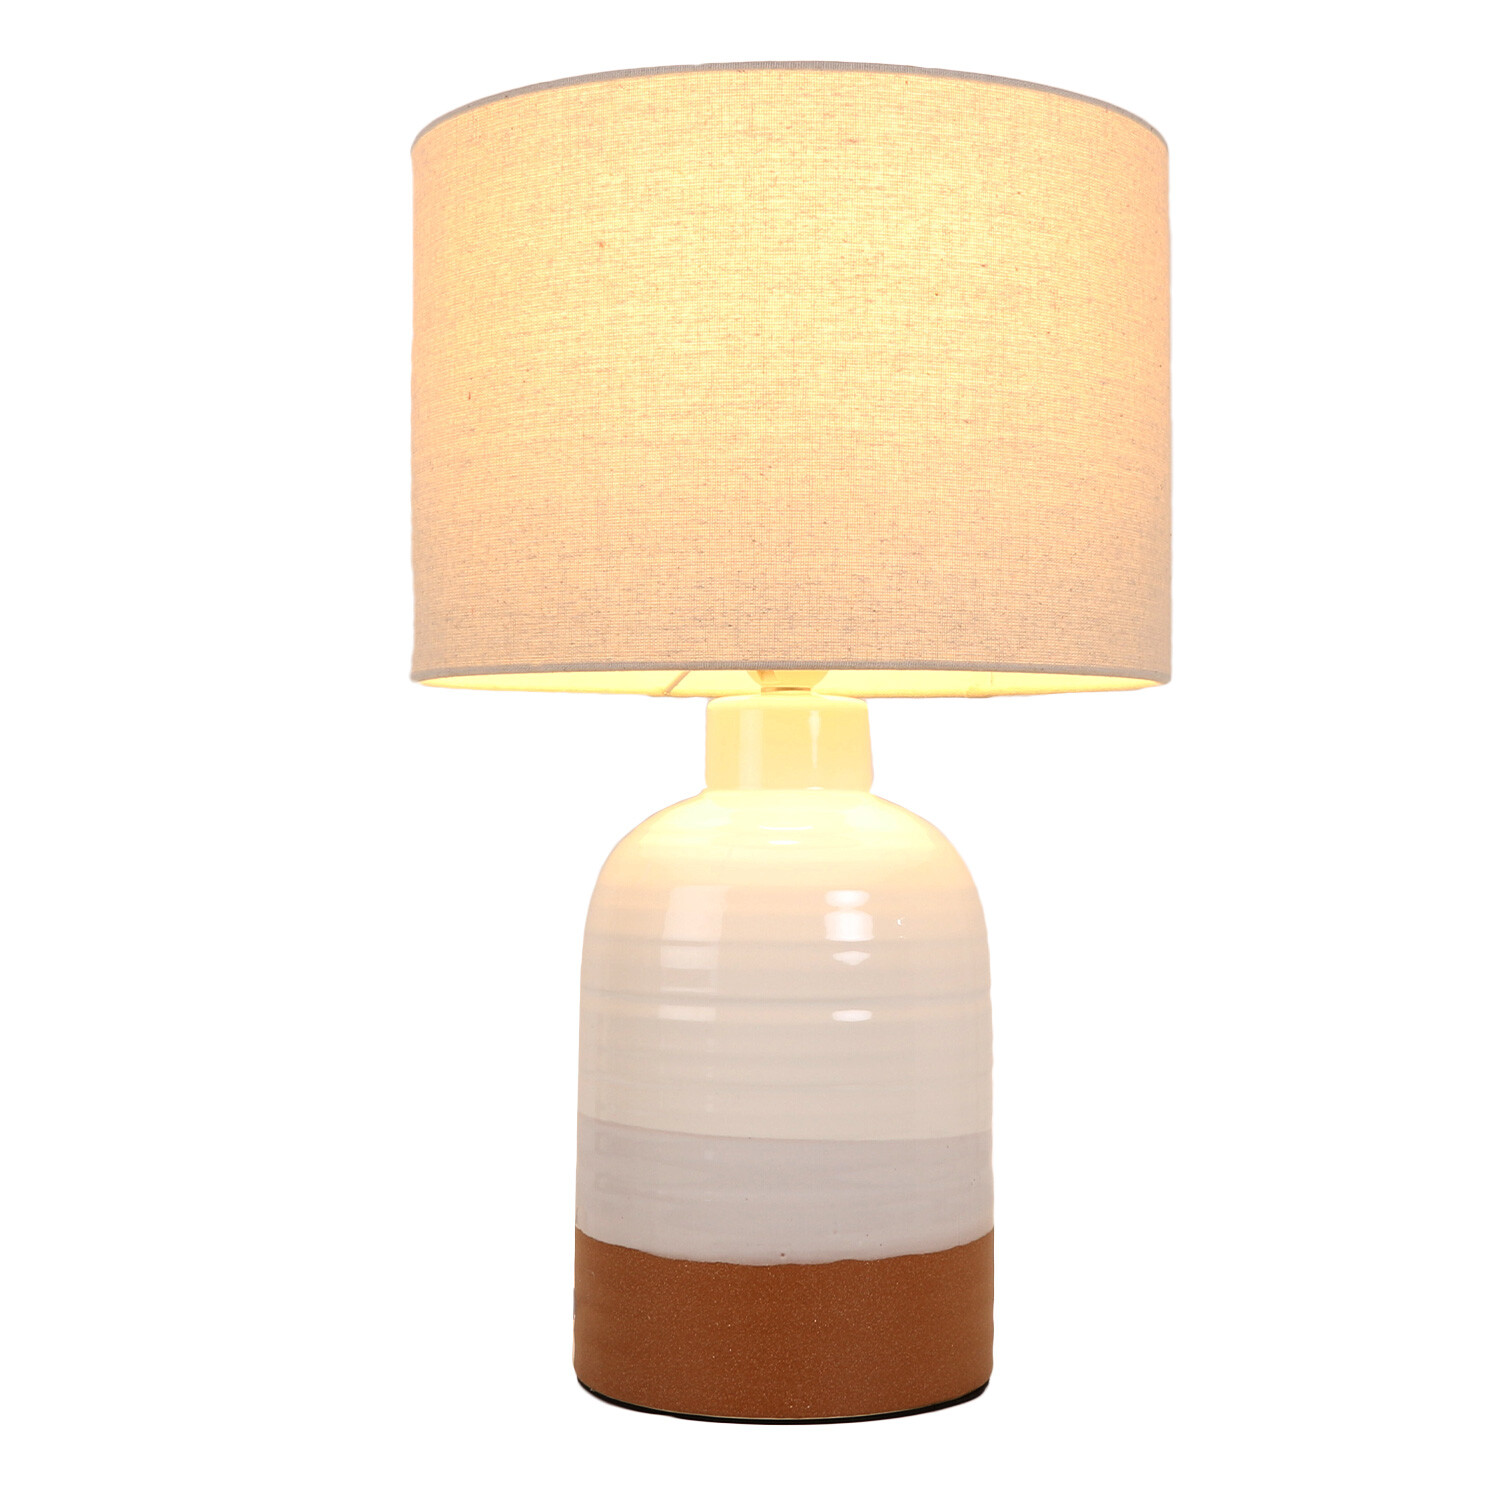 White and Amber Rustic Table Lamp Image 2